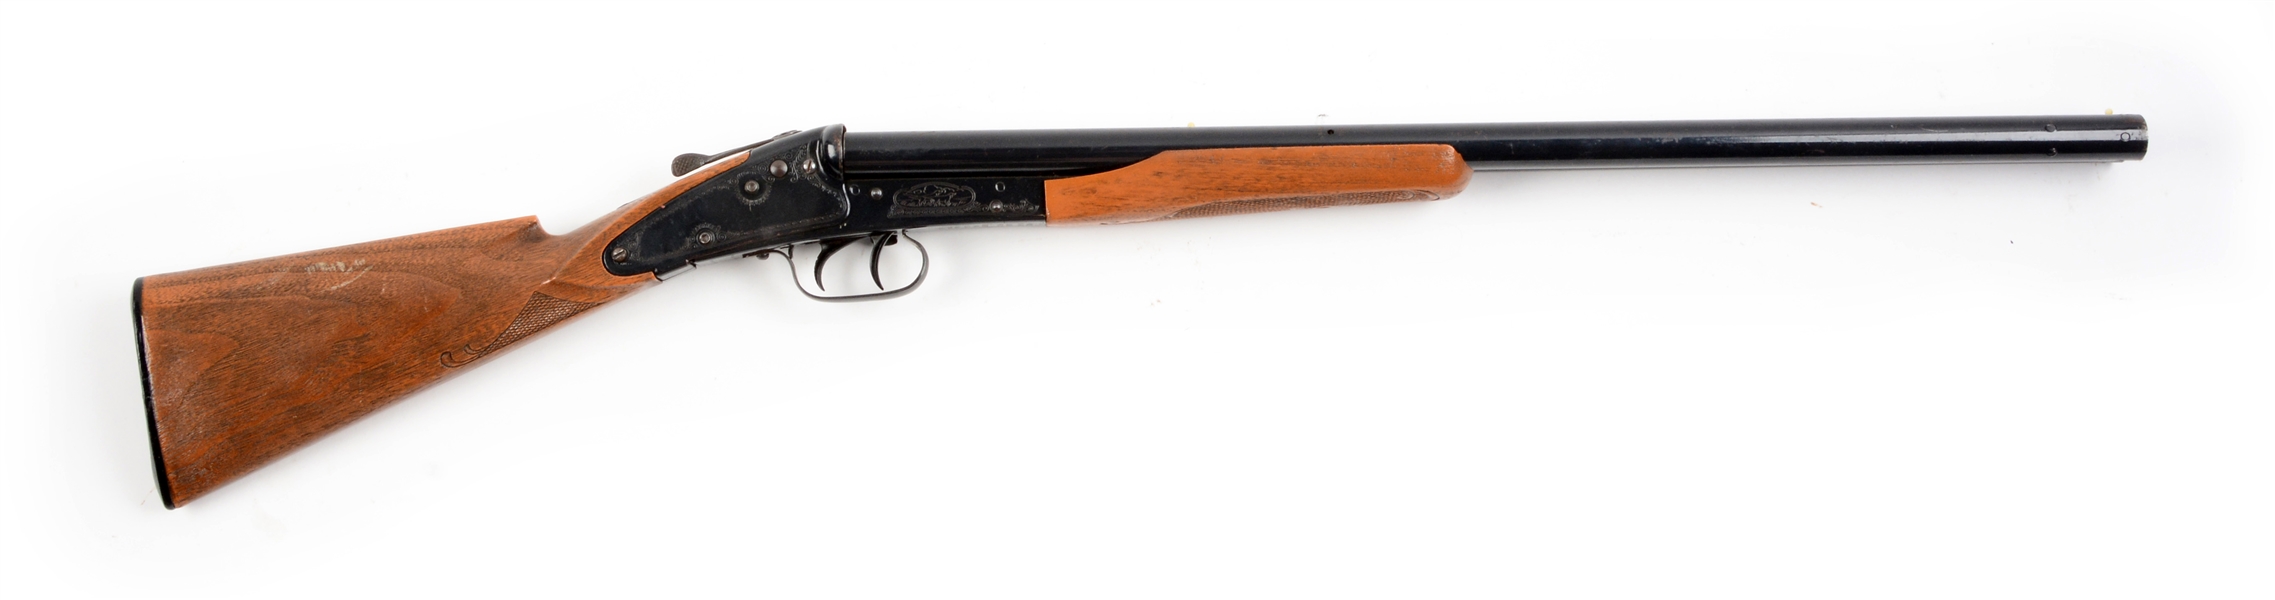 DAISY MODEL 410 SIDE BY SIDE AIR RIFLE.